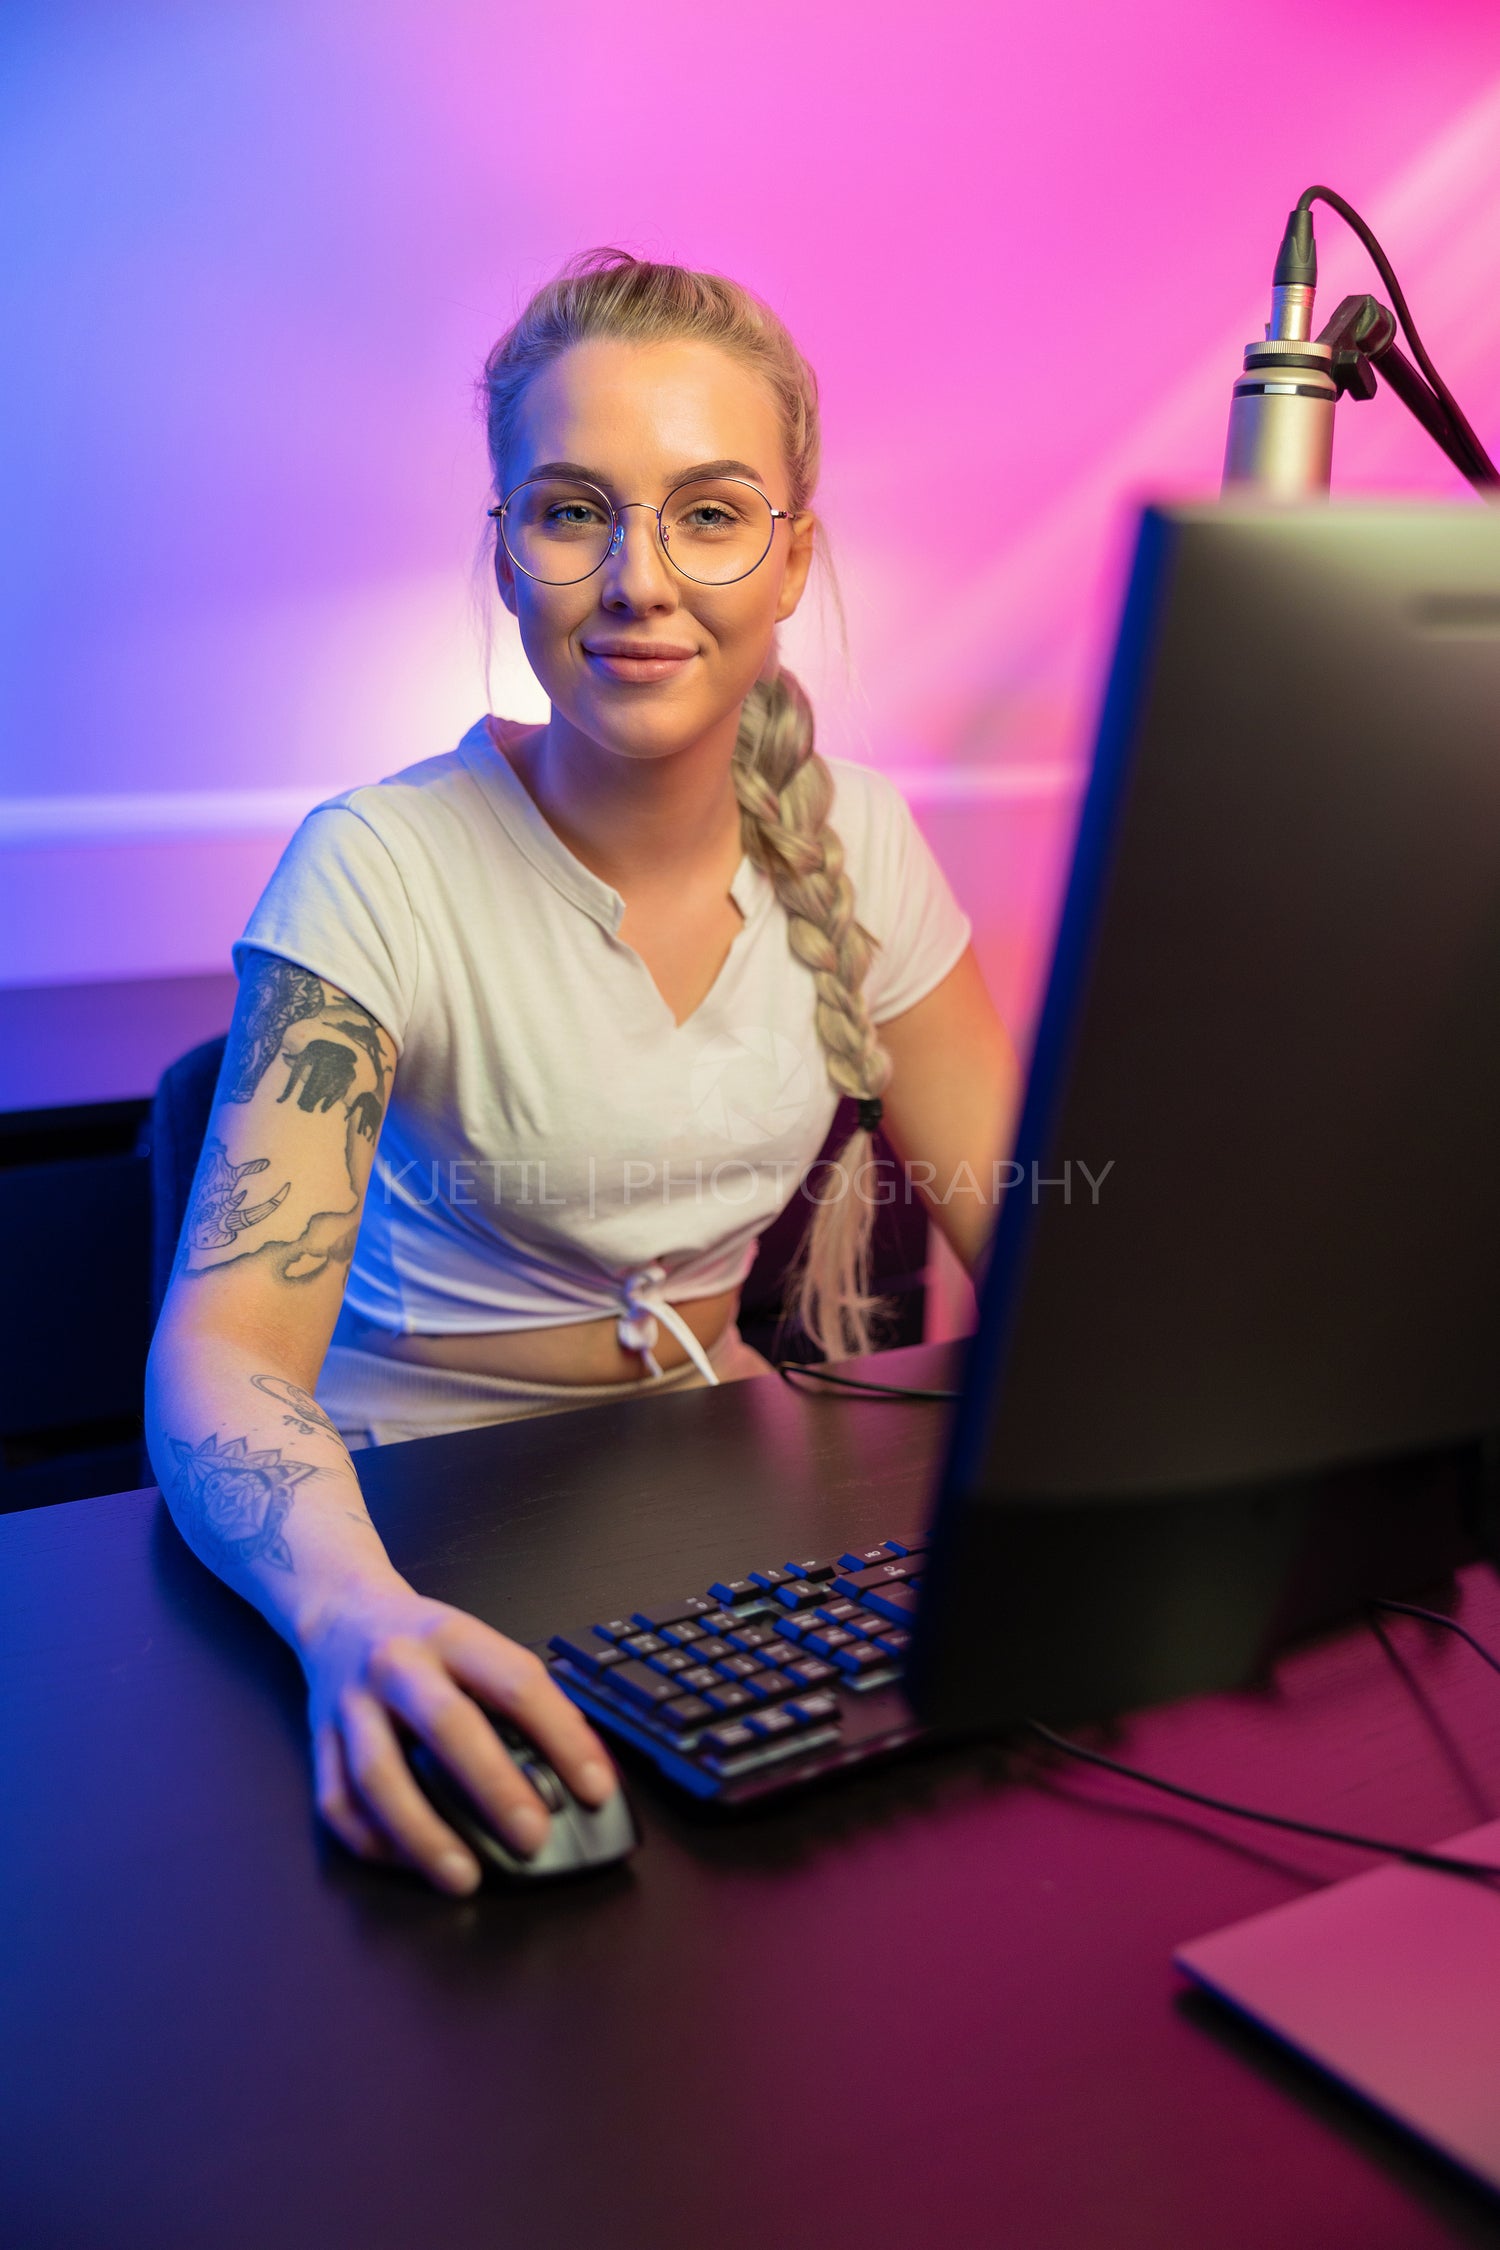 Portrait of Blonde Gamer Girl with Glasses Playing Online Video Game on Her Computer